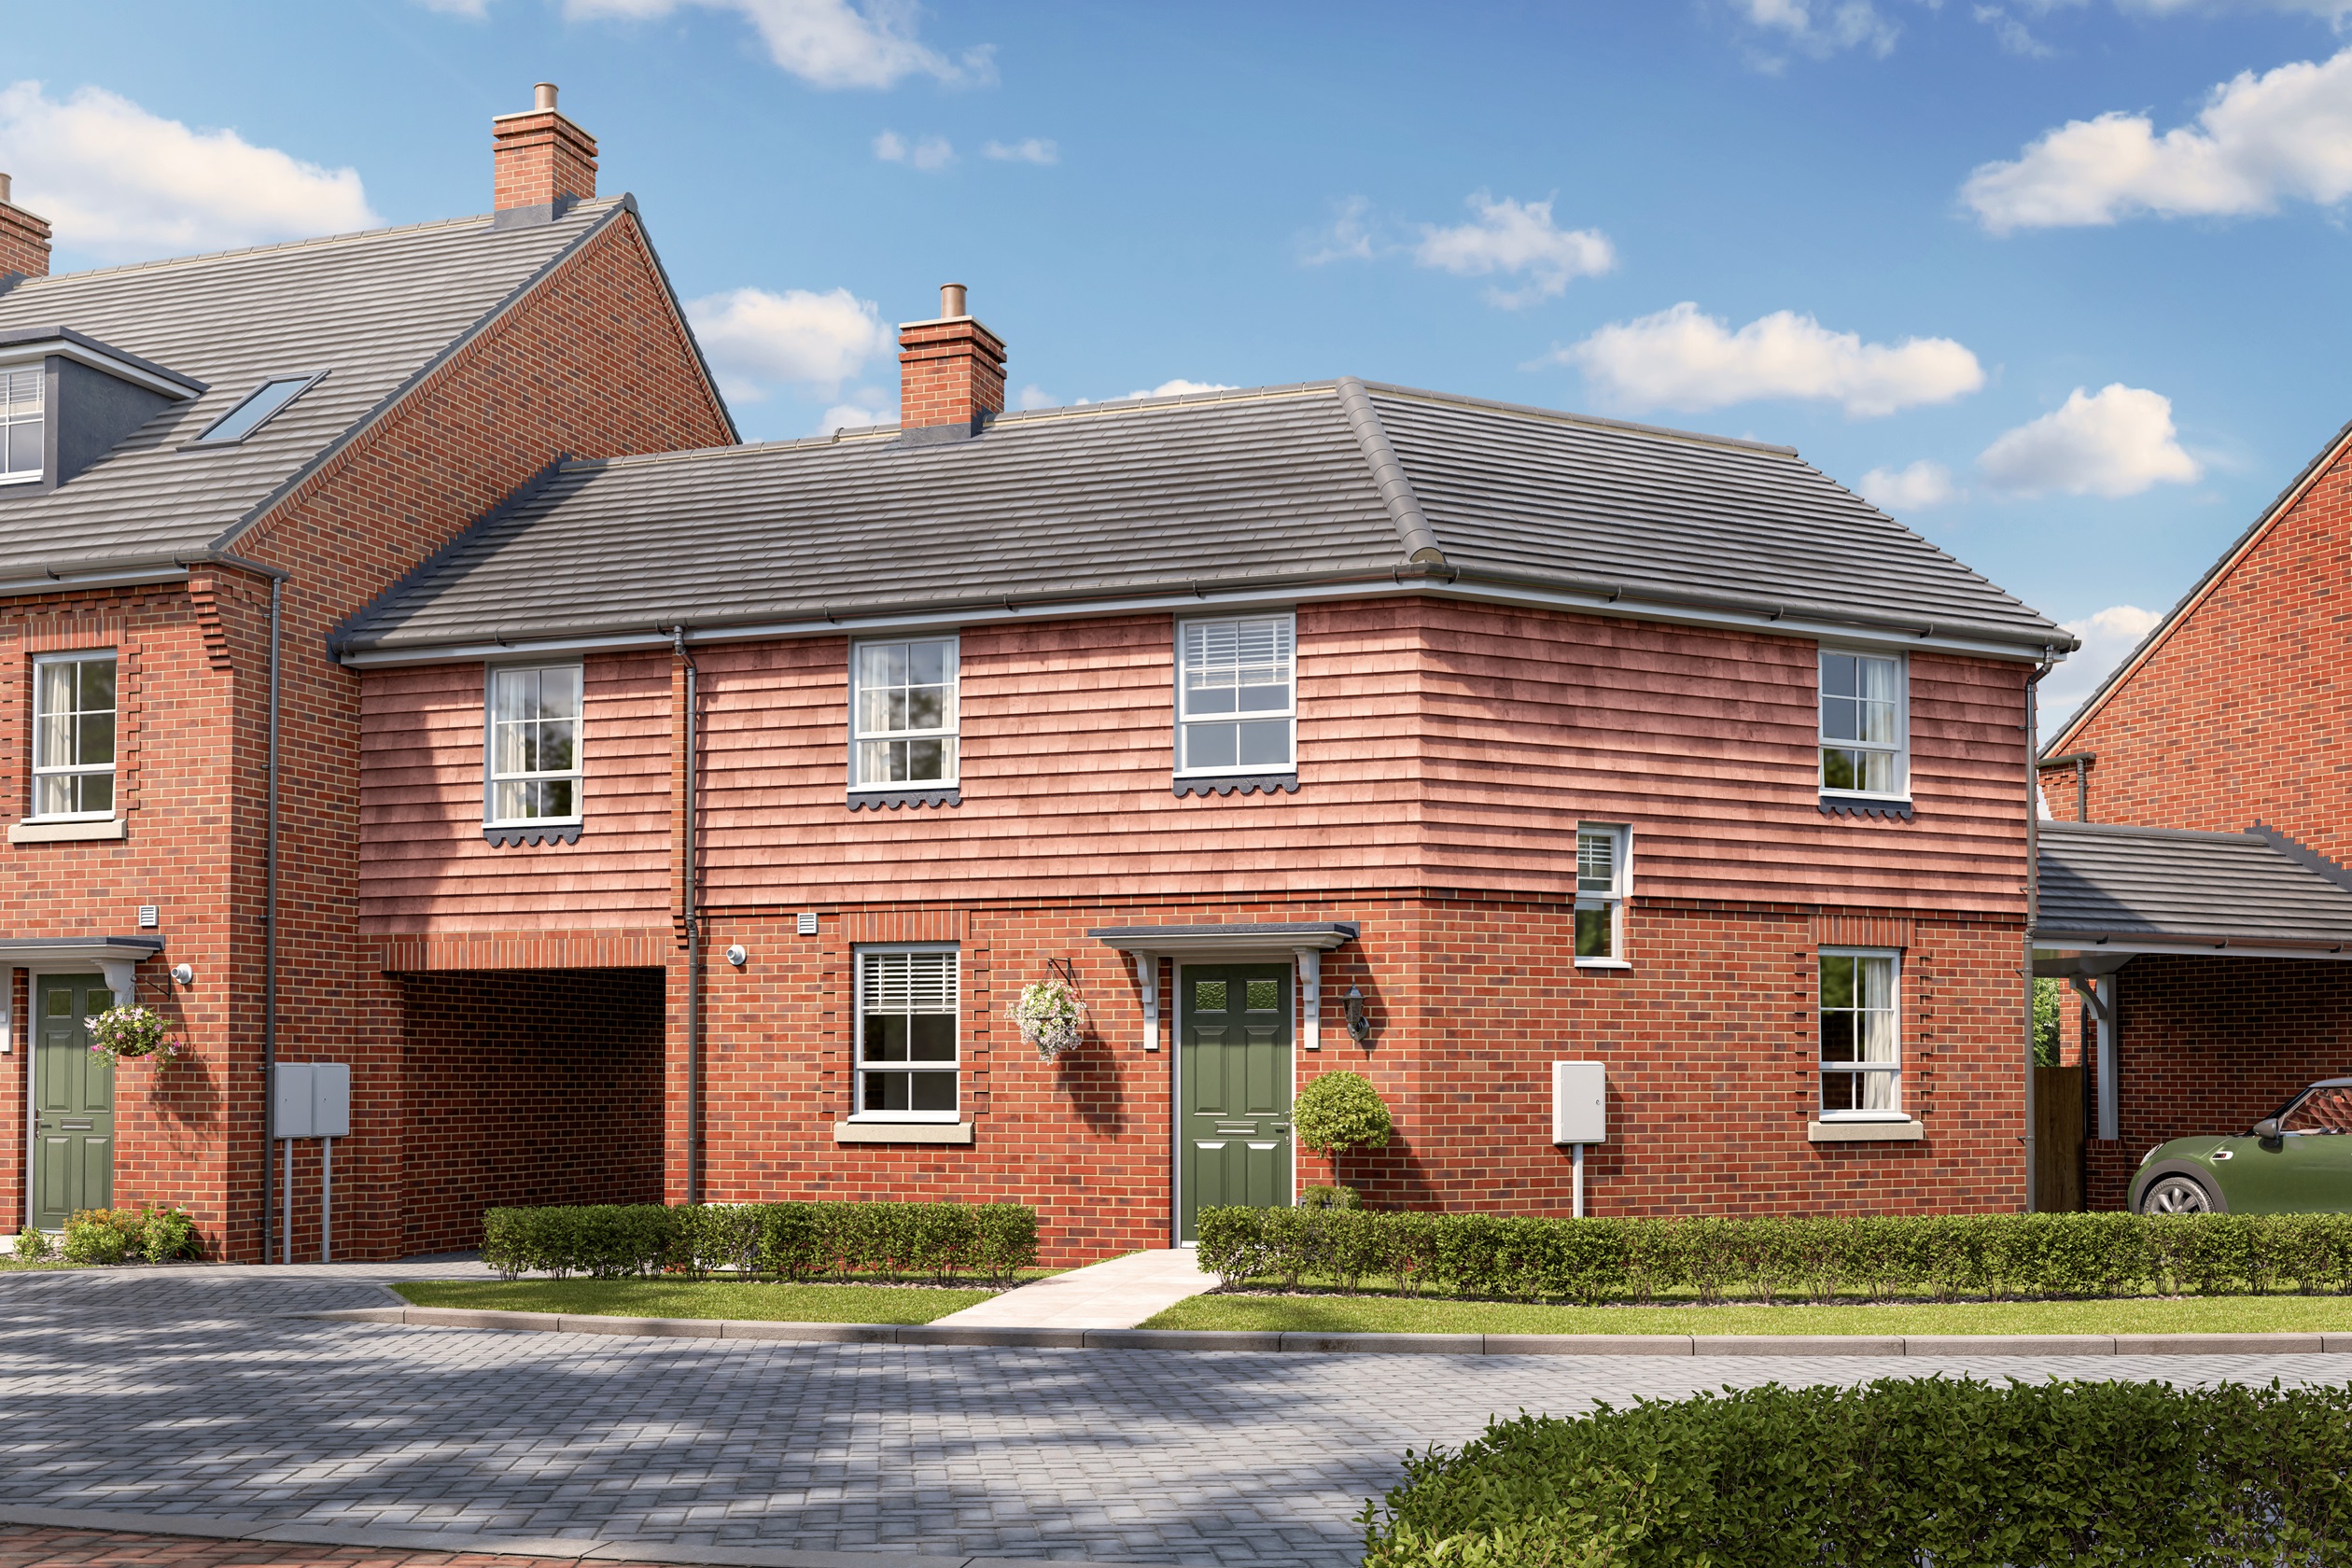 Property 1 of 8. The Lutterworth CGI Orchard Green @ Kingsbrook